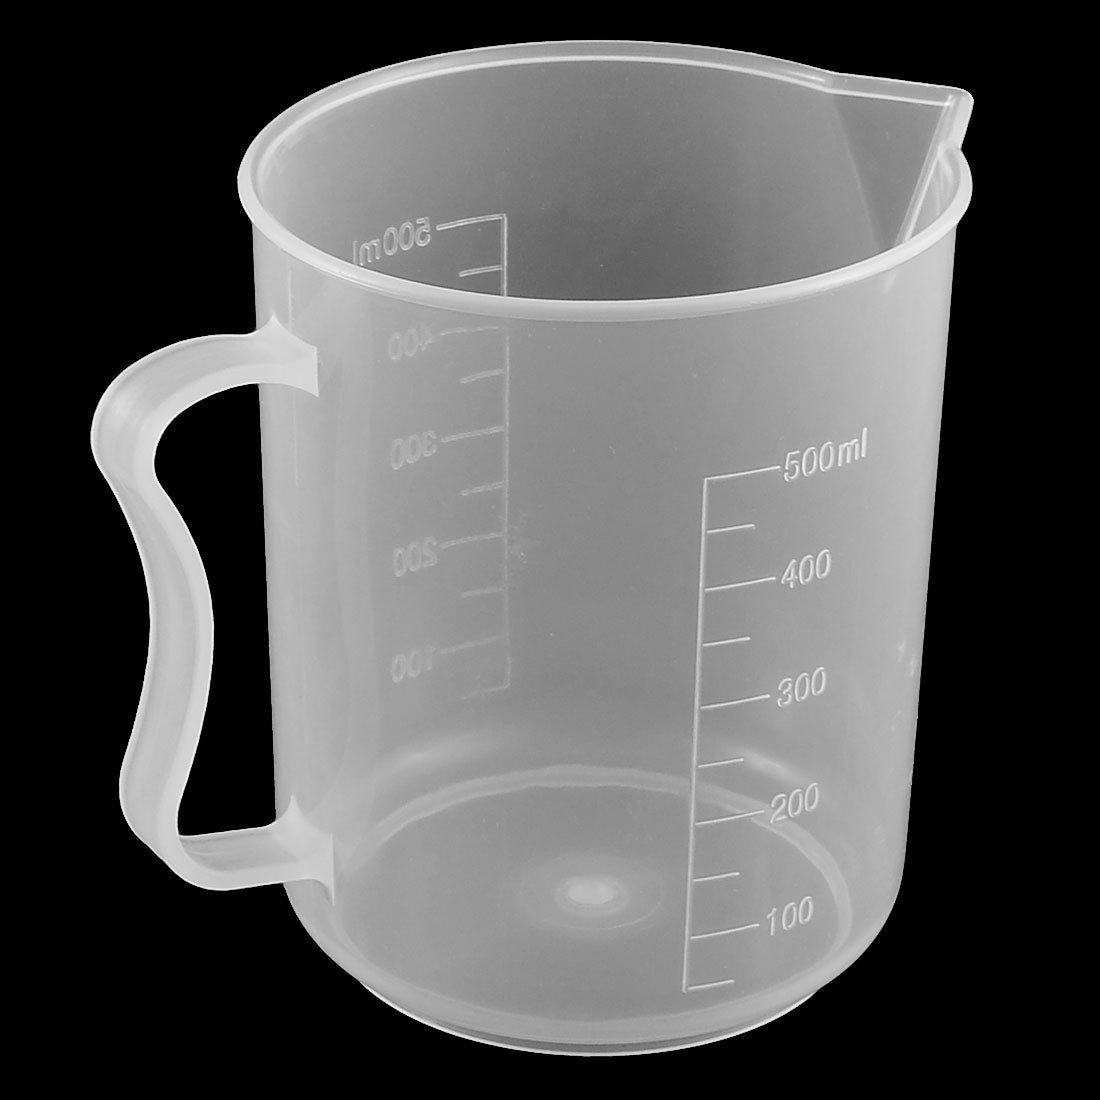 uxcell Uxcell 500mL Laboratory Experiment Plastic Water Volume Graduated Measuring Cup 3pcs